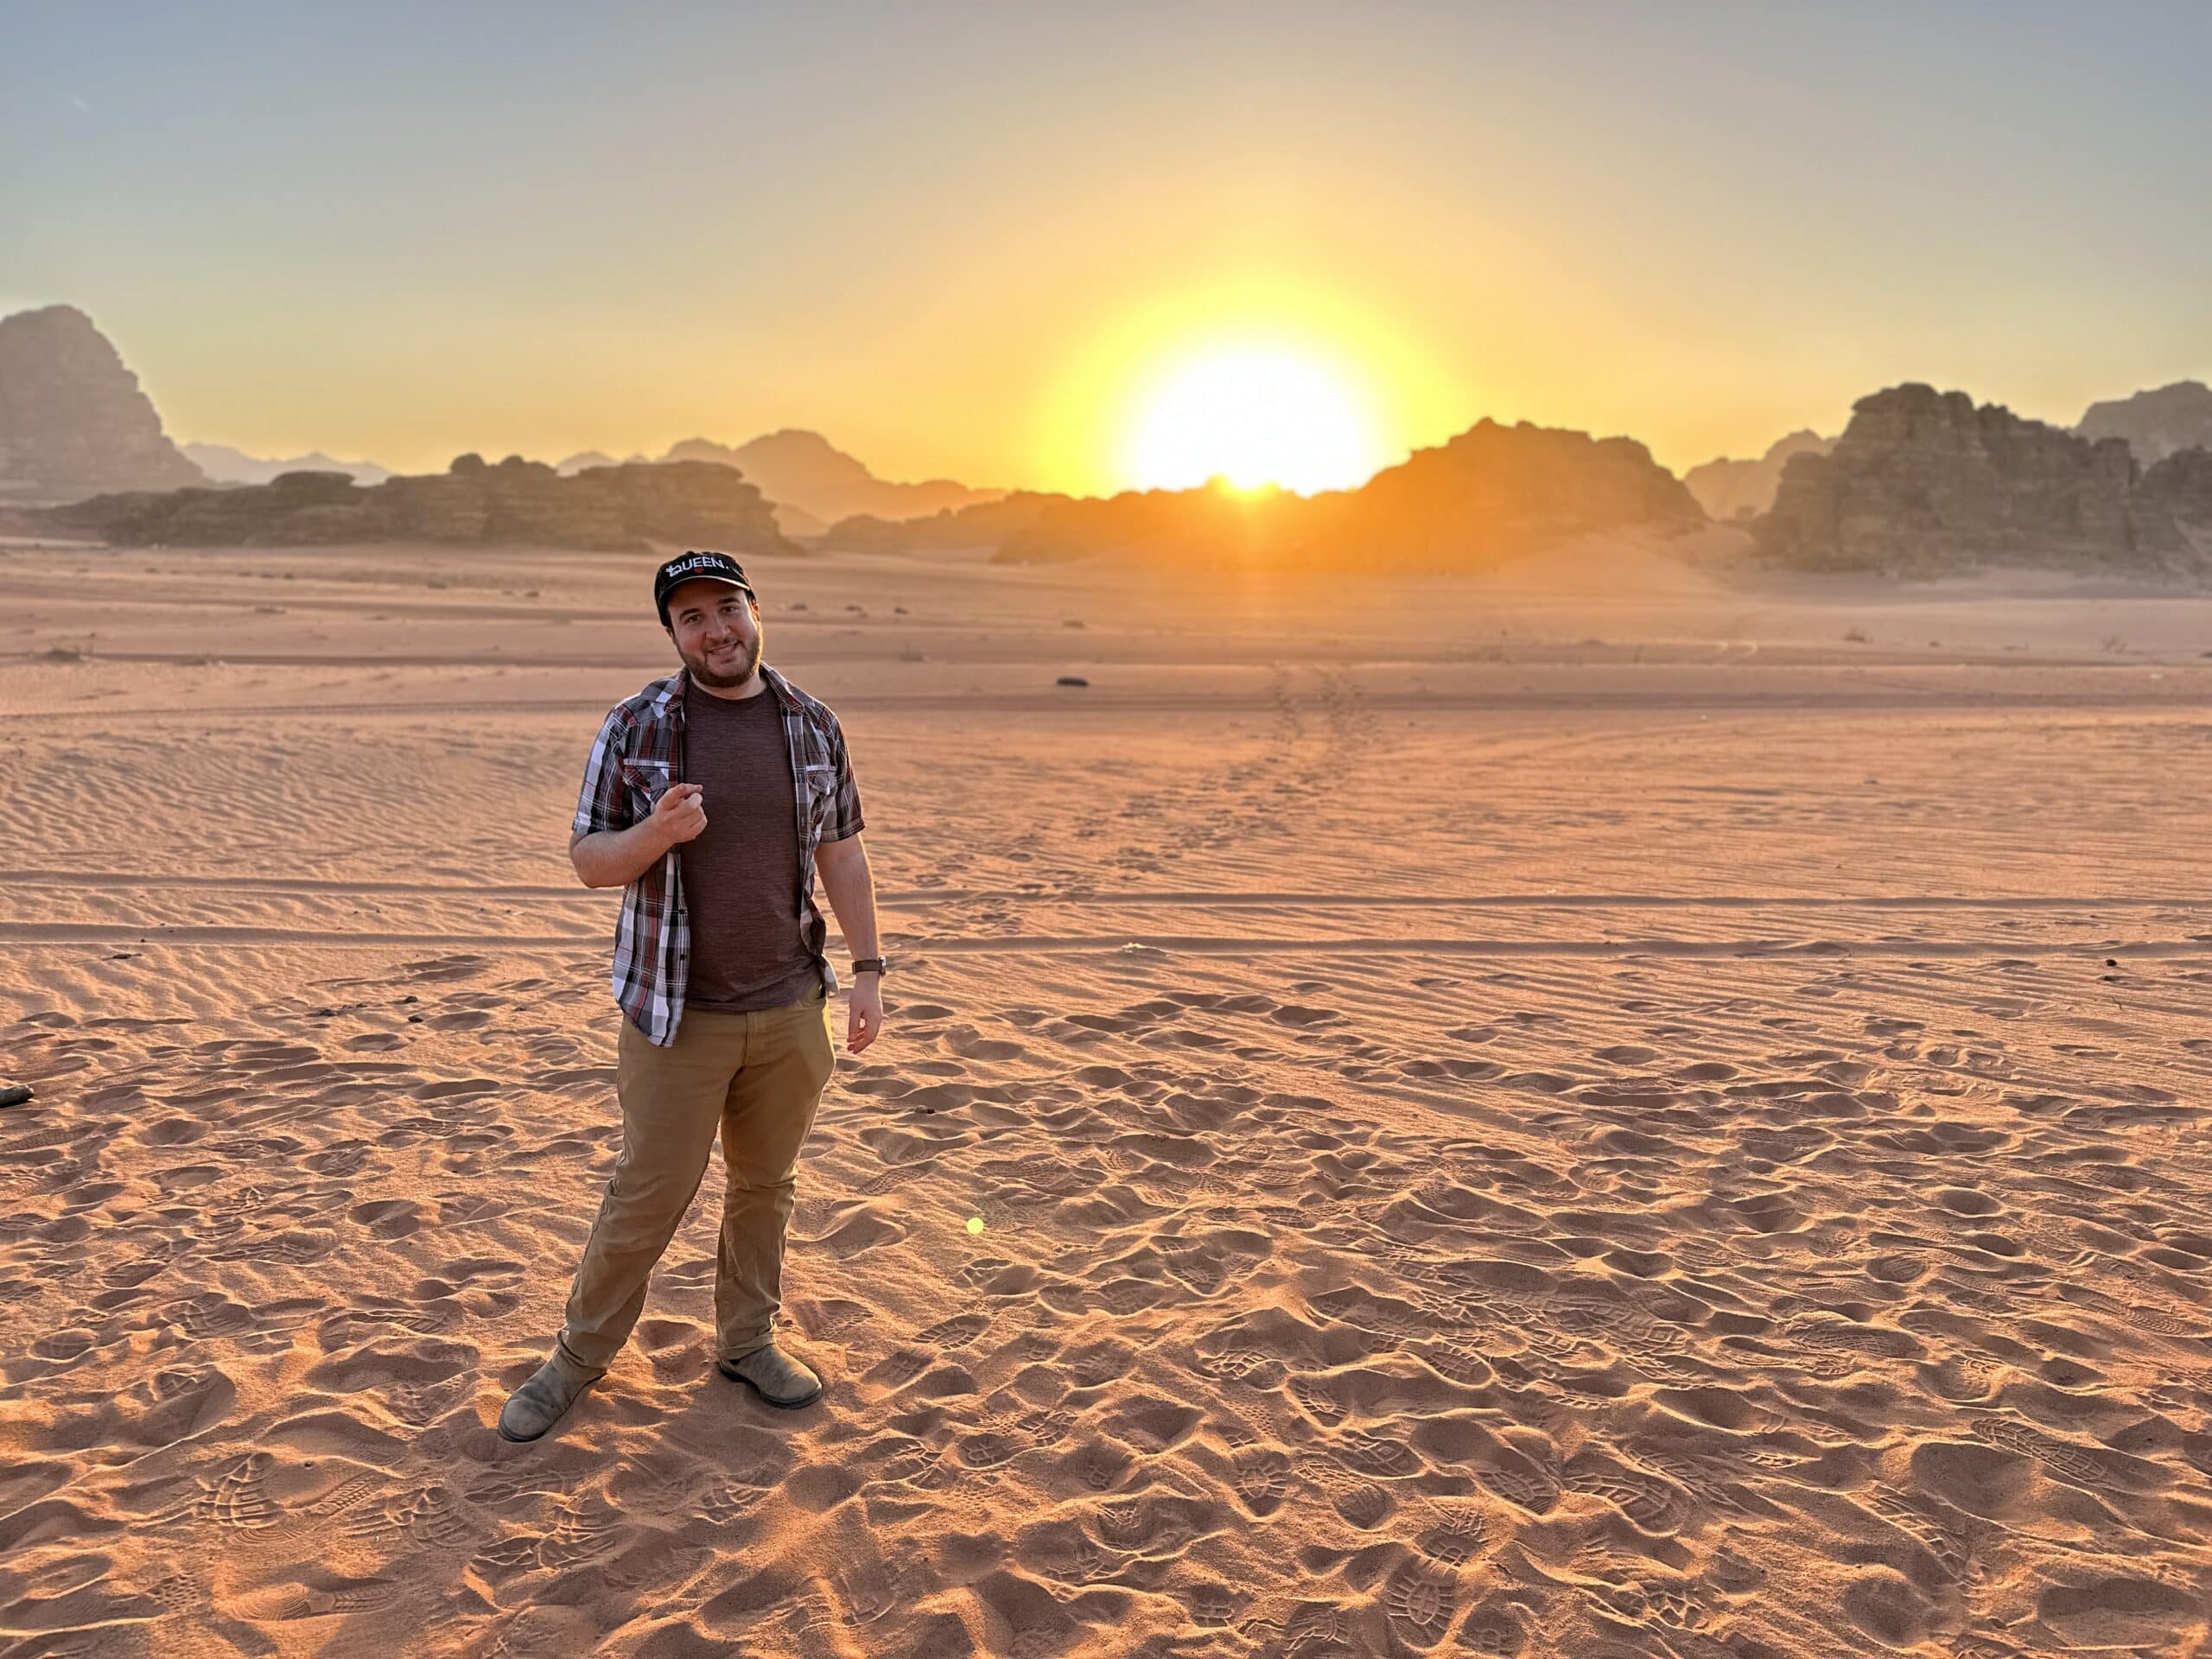 Josh stands in the desert, a sunset behind him.